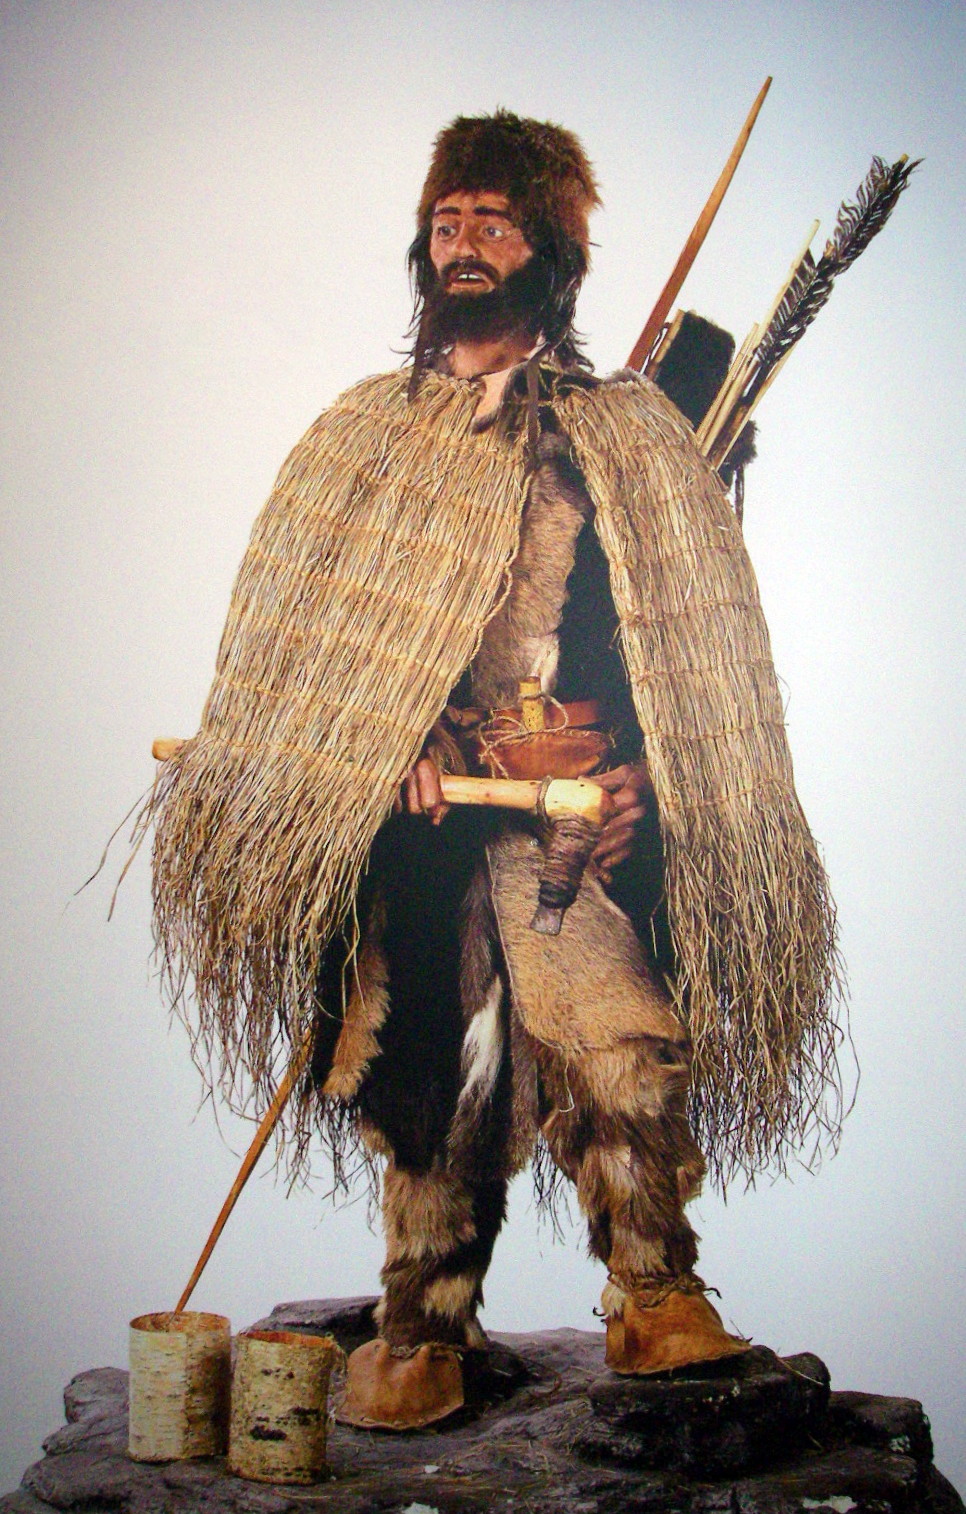 Otzi the Iceman outfit